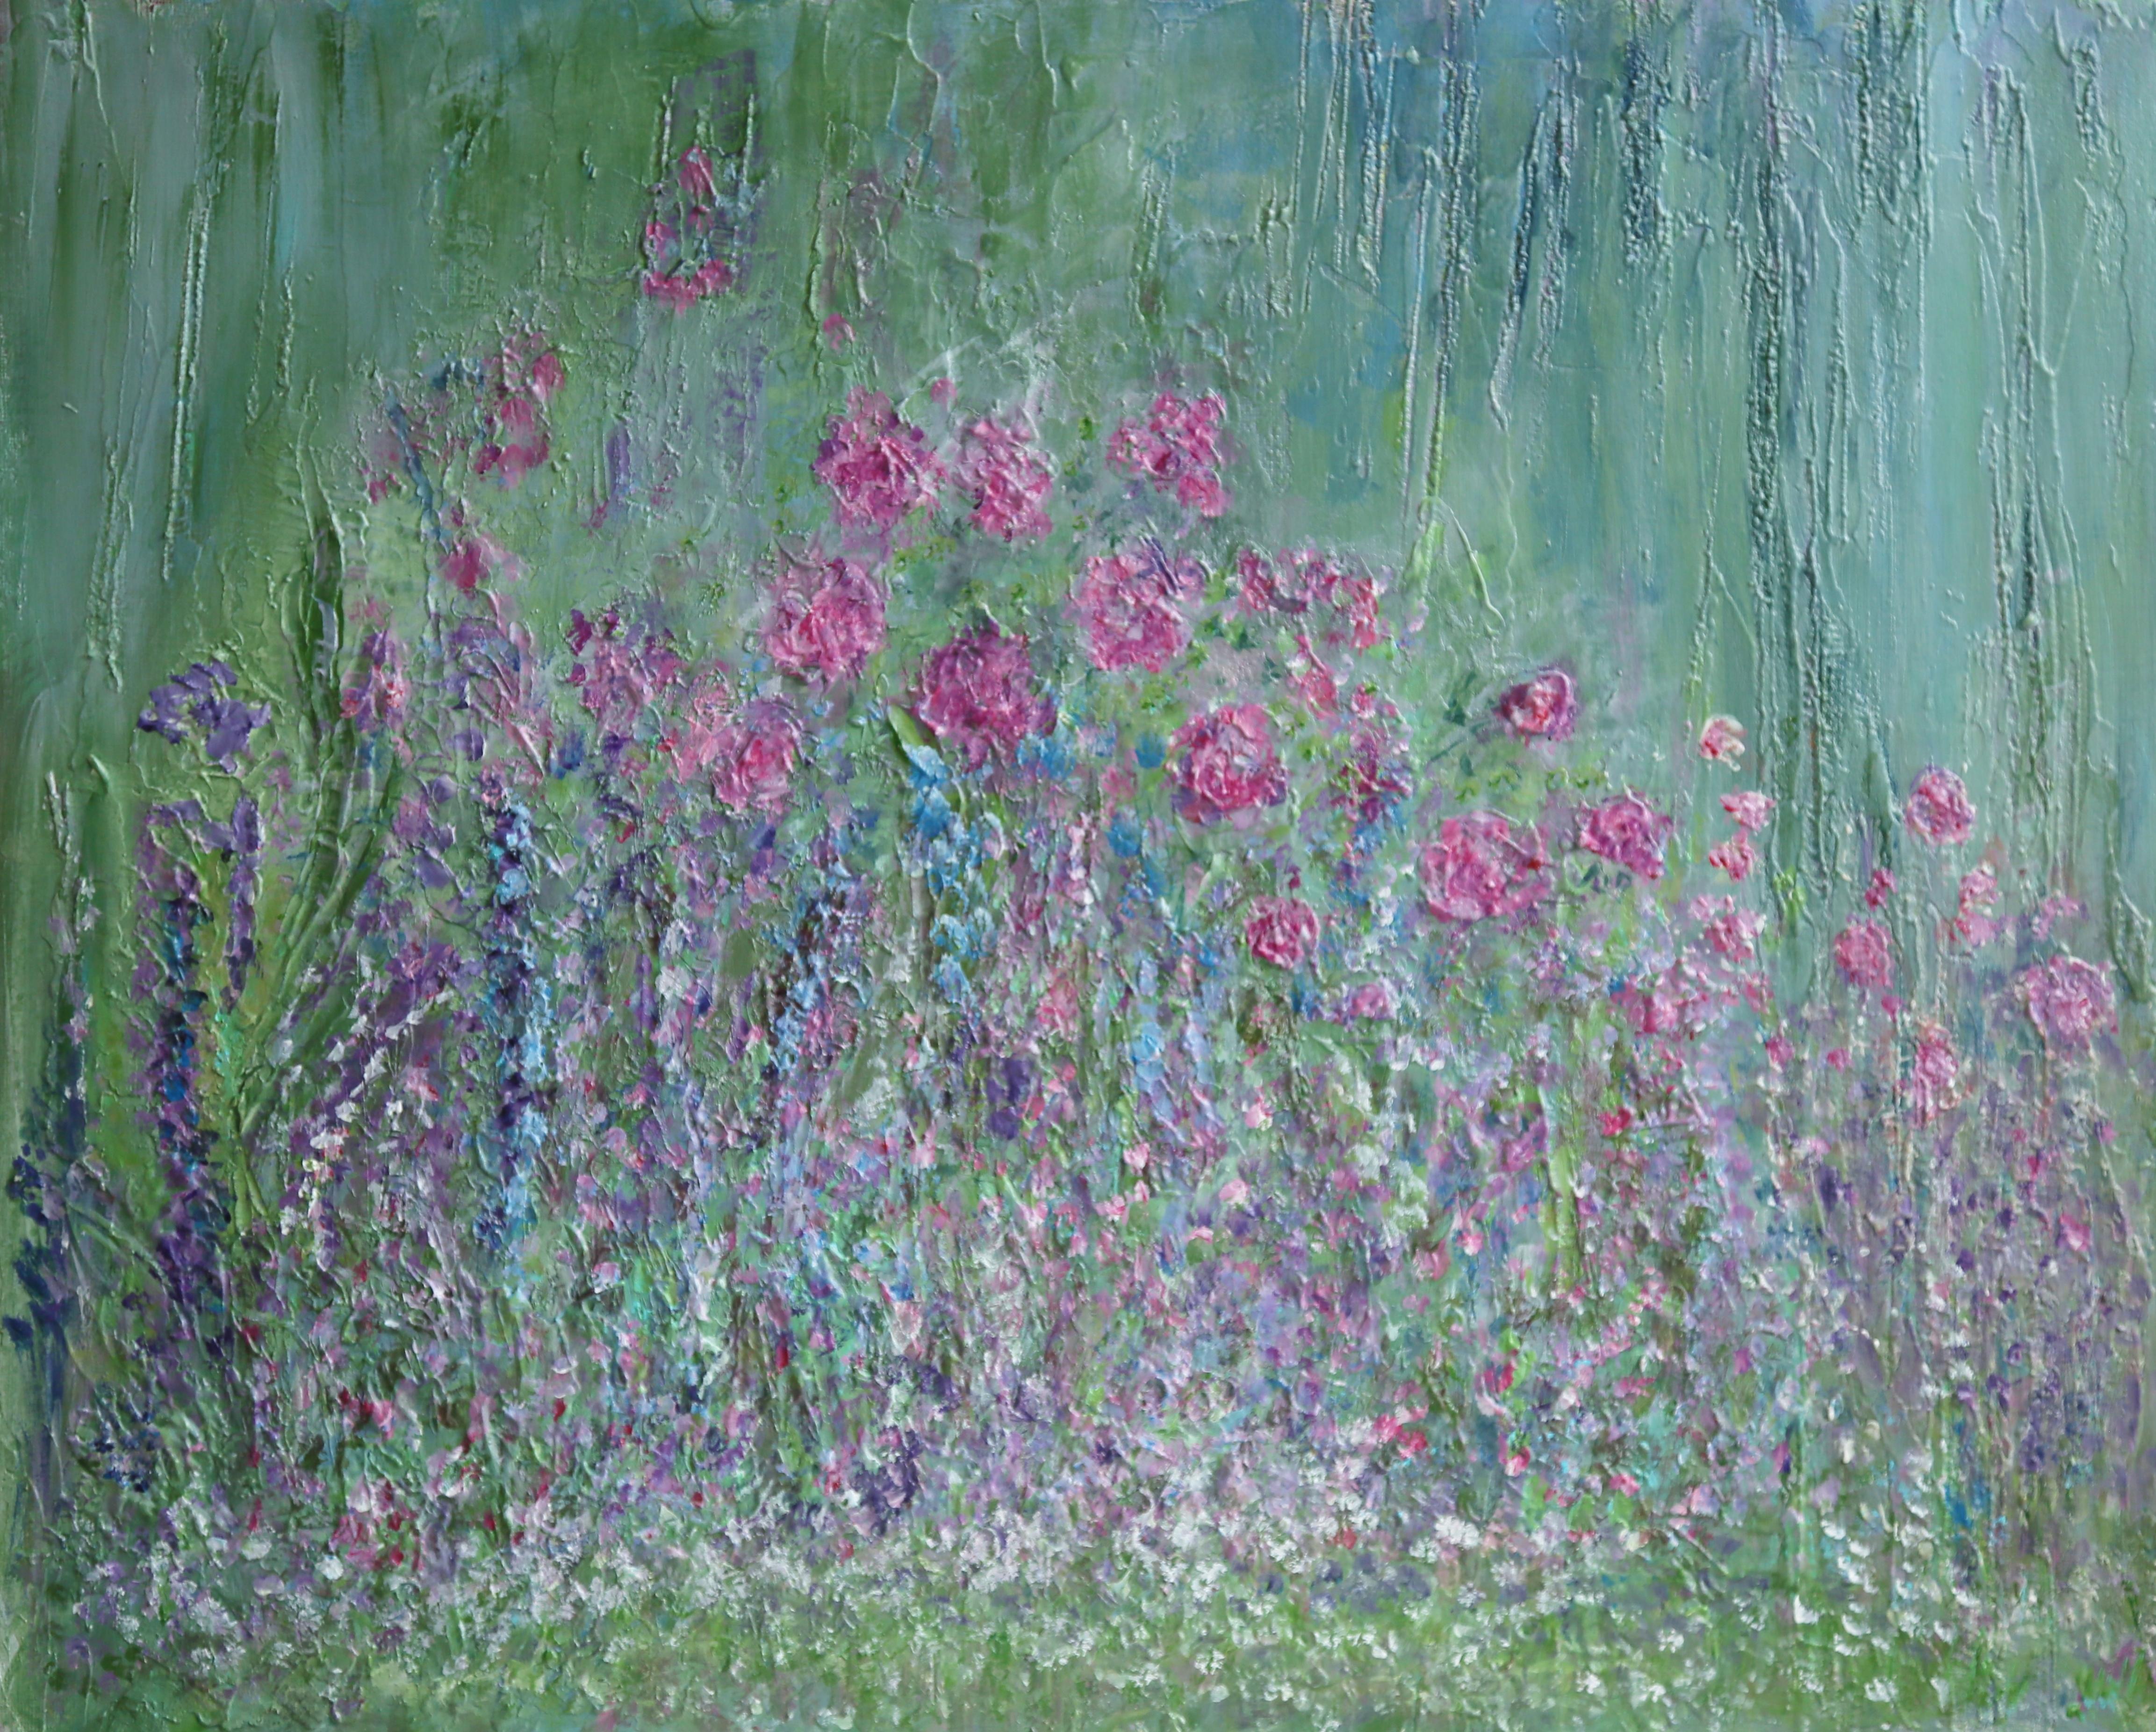 June Border. Contemporary Impressionist Oil Painting